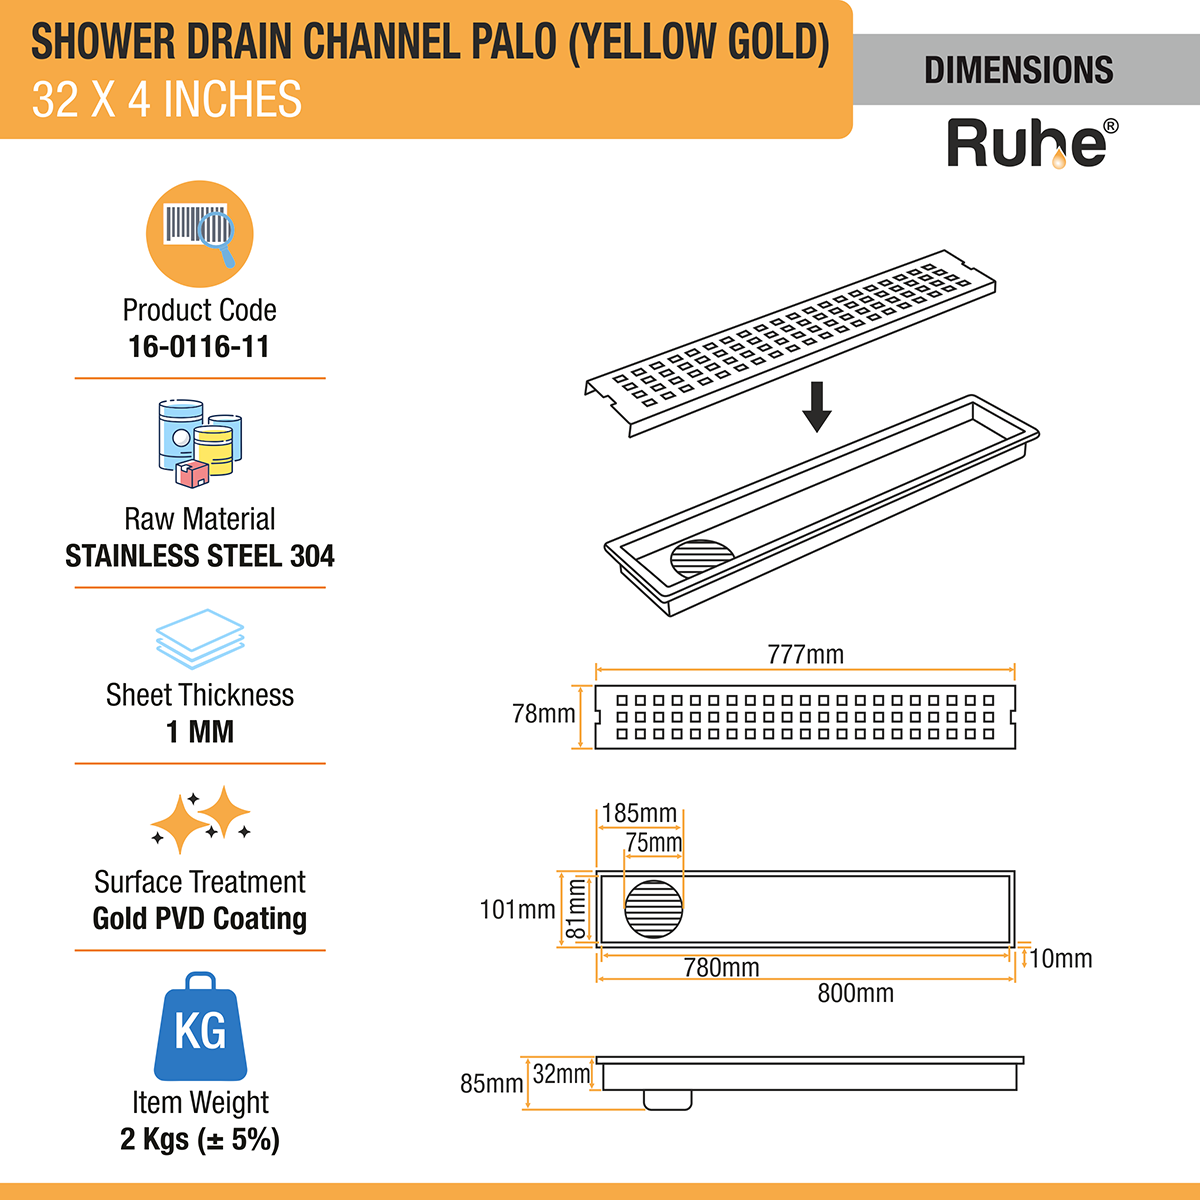 Palo Shower Drain Channel (32 x 4 Inches) YELLOW GOLD dimensions and size